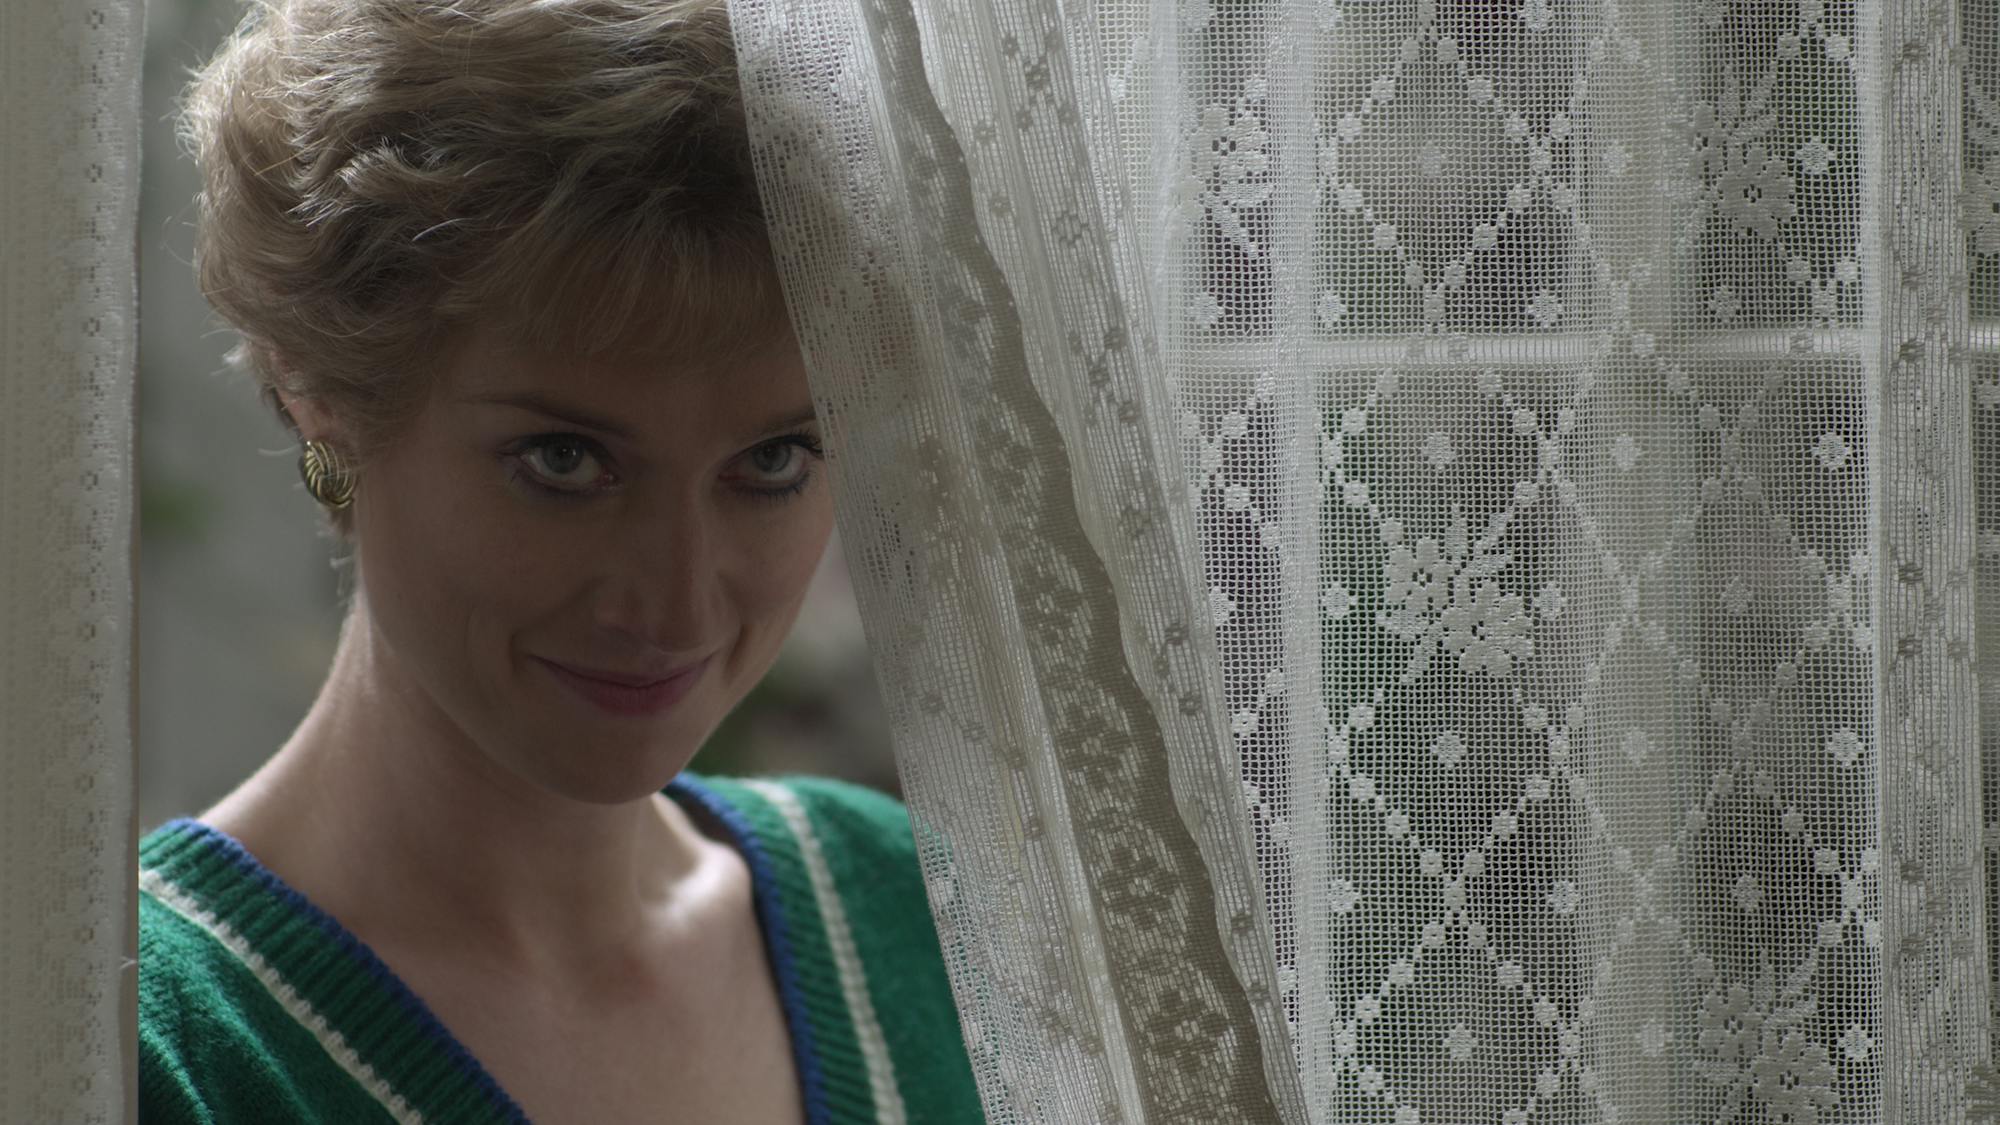 Princess Diana (Elizabeth Debicki) wears a green sweater and peeks out from behind a lacy white curtain.